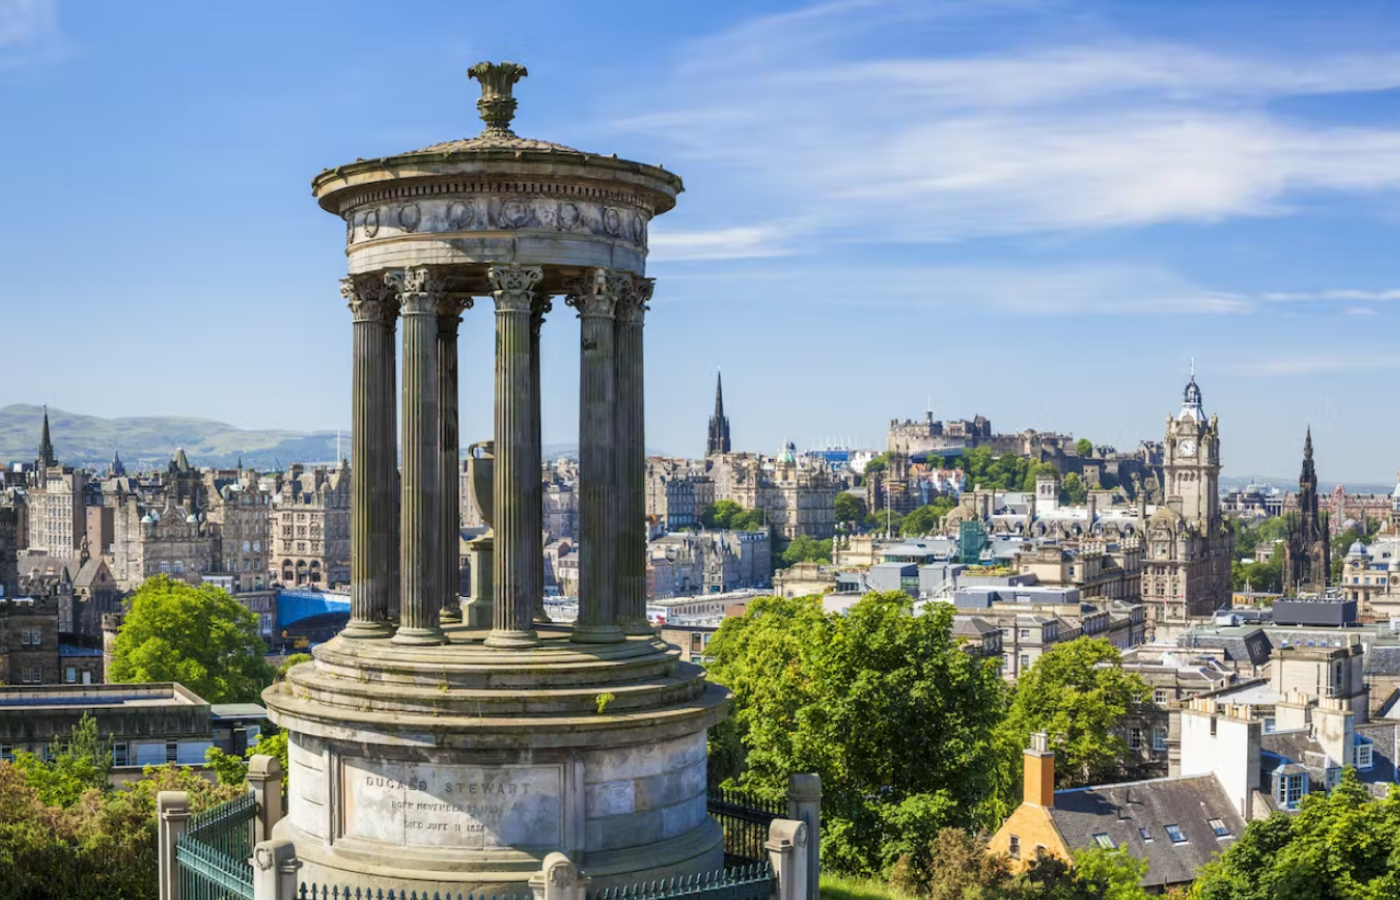 europe tour packages from edinburgh